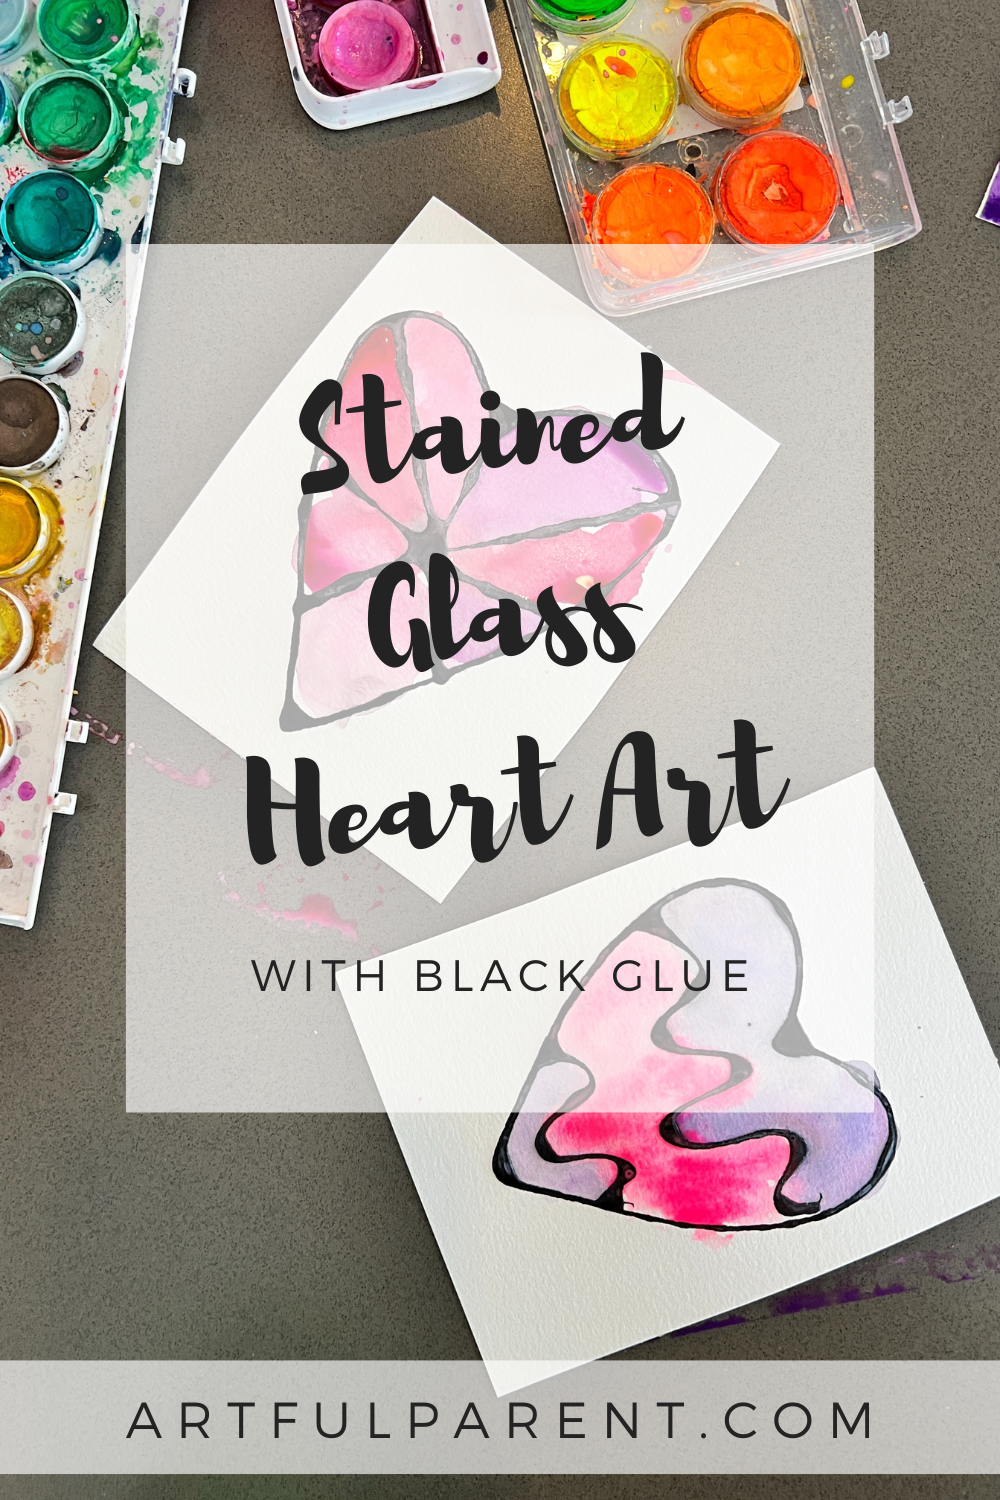 How to Make Stained-Glass Heart Art with Black Glue